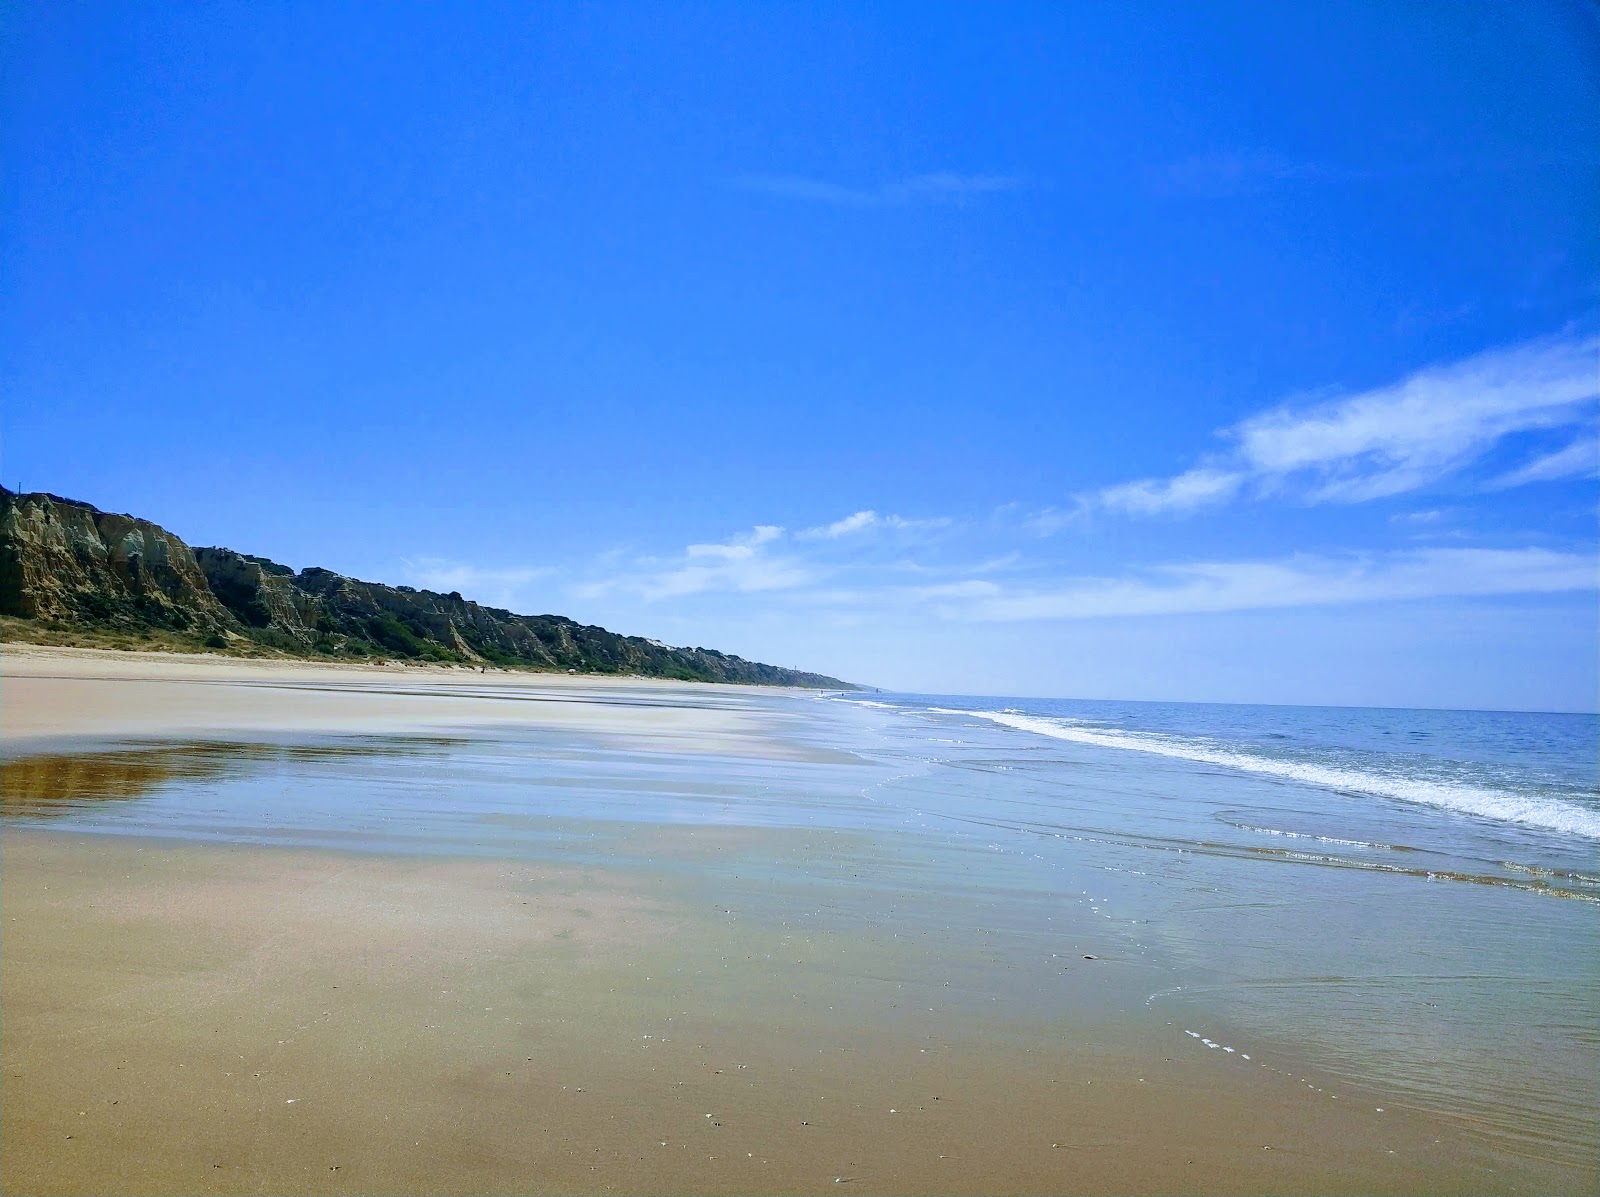 Photo of Playa de Rompeculos with green water surface